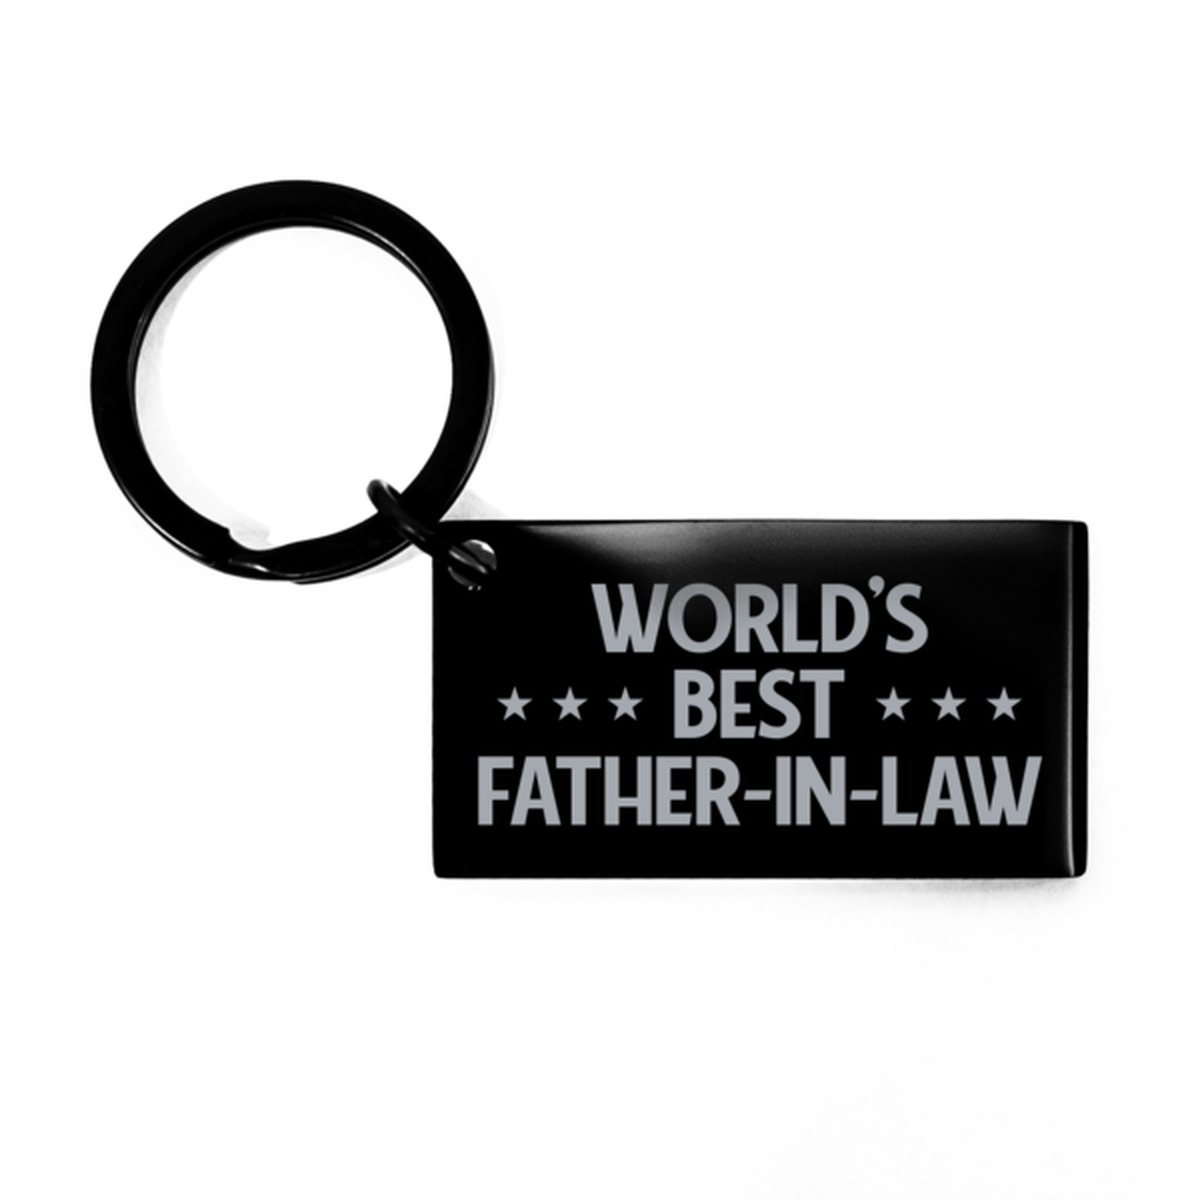 Worlds Best Father-in-law Gifts, Funny Black Engraved Keychain For Father-in-law, Birthday Presents For Men